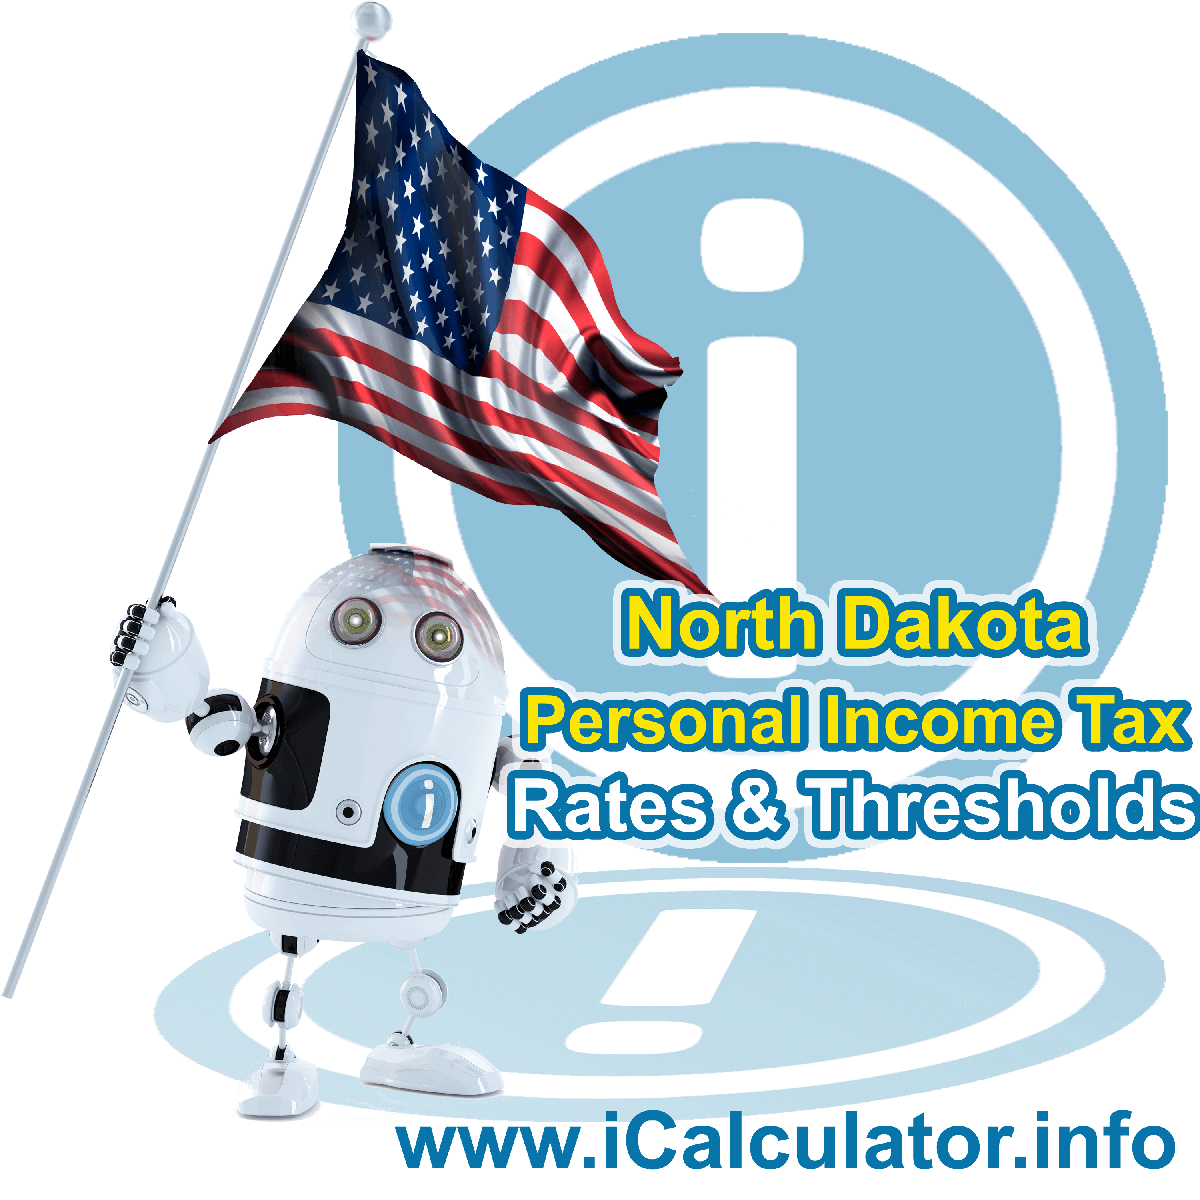 North Dakota State Tax Tables 2019. This image displays details of the North Dakota State Tax Tables for the 2019 tax return year which is provided in support of the 2019 US Tax Calculator